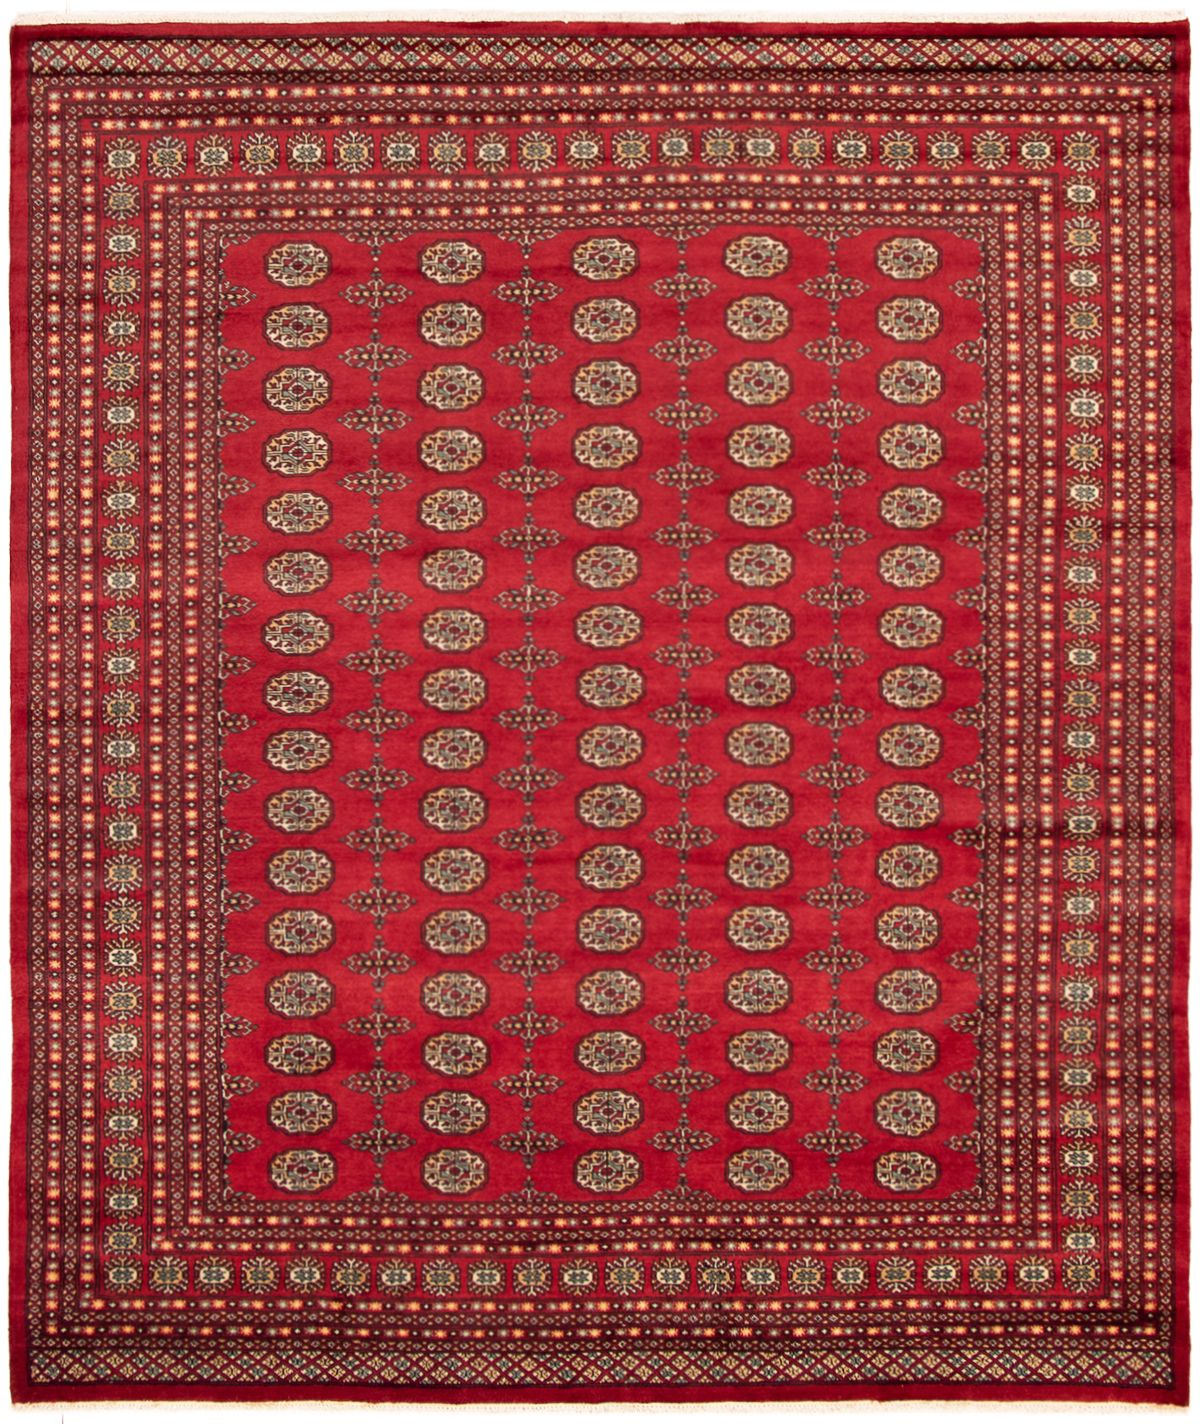 Hand-knotted Finest Peshawar Bokhara Red Wool Rug 8'0" x 9'5" Size: 8'0" x 9'5"  